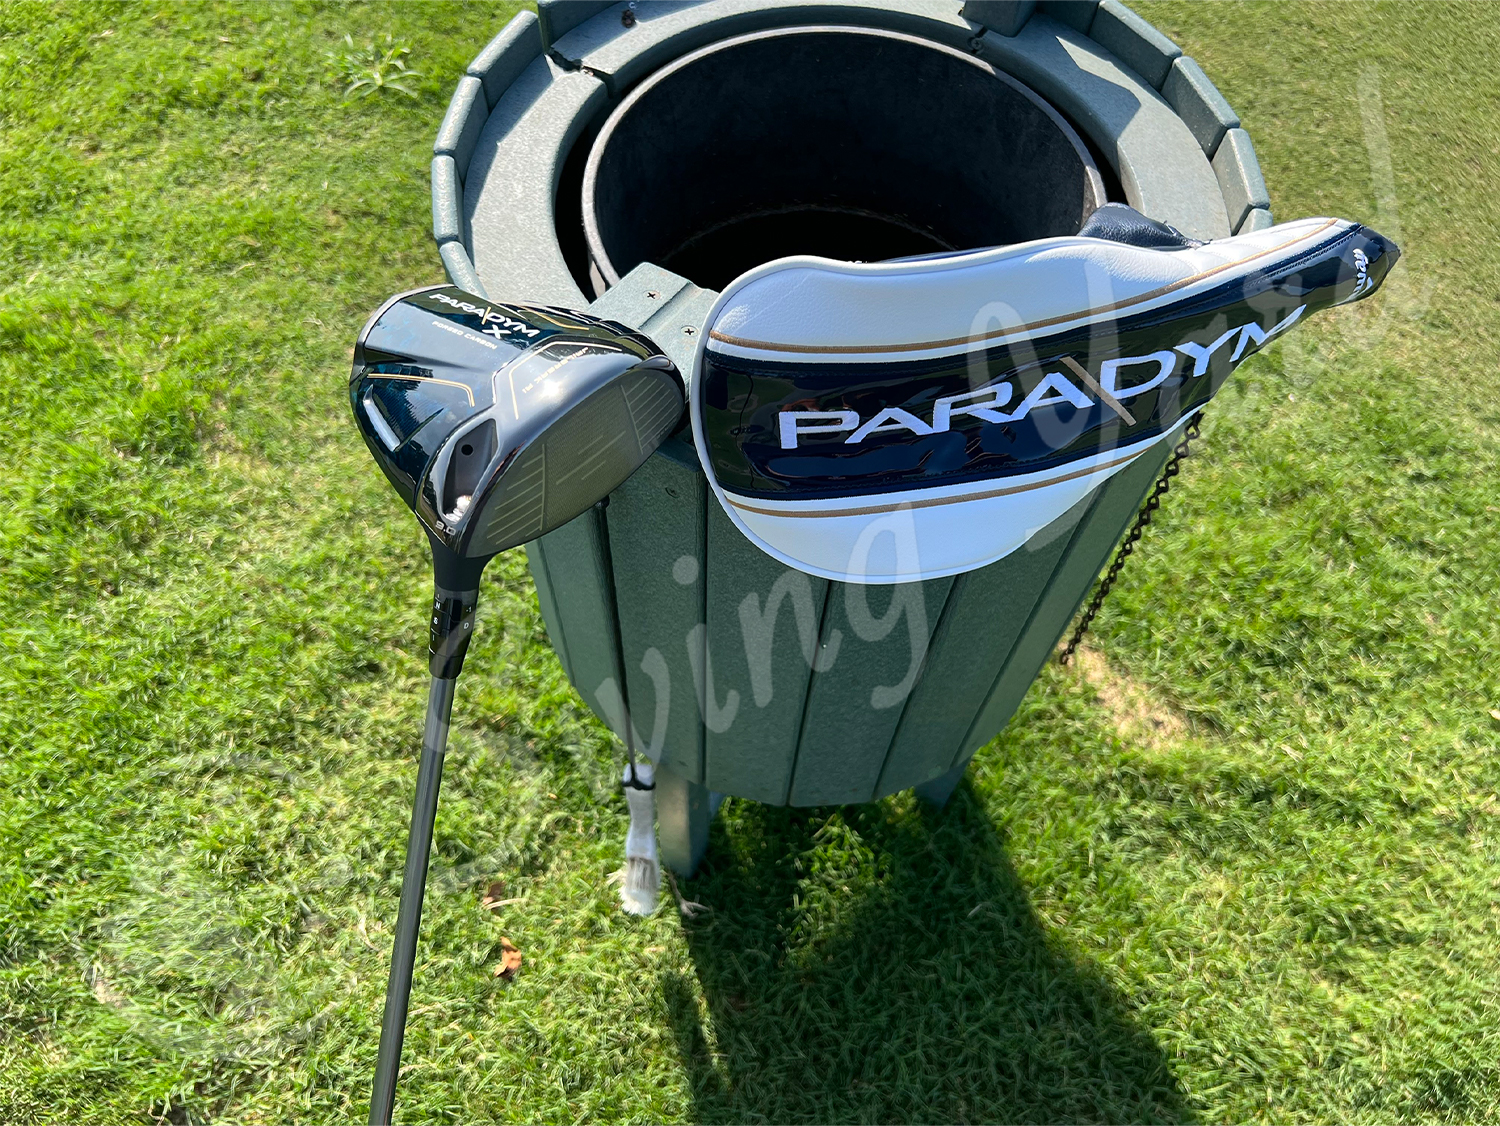 A Callaway Paradym X driver and headcover in the golf basket at the golf course